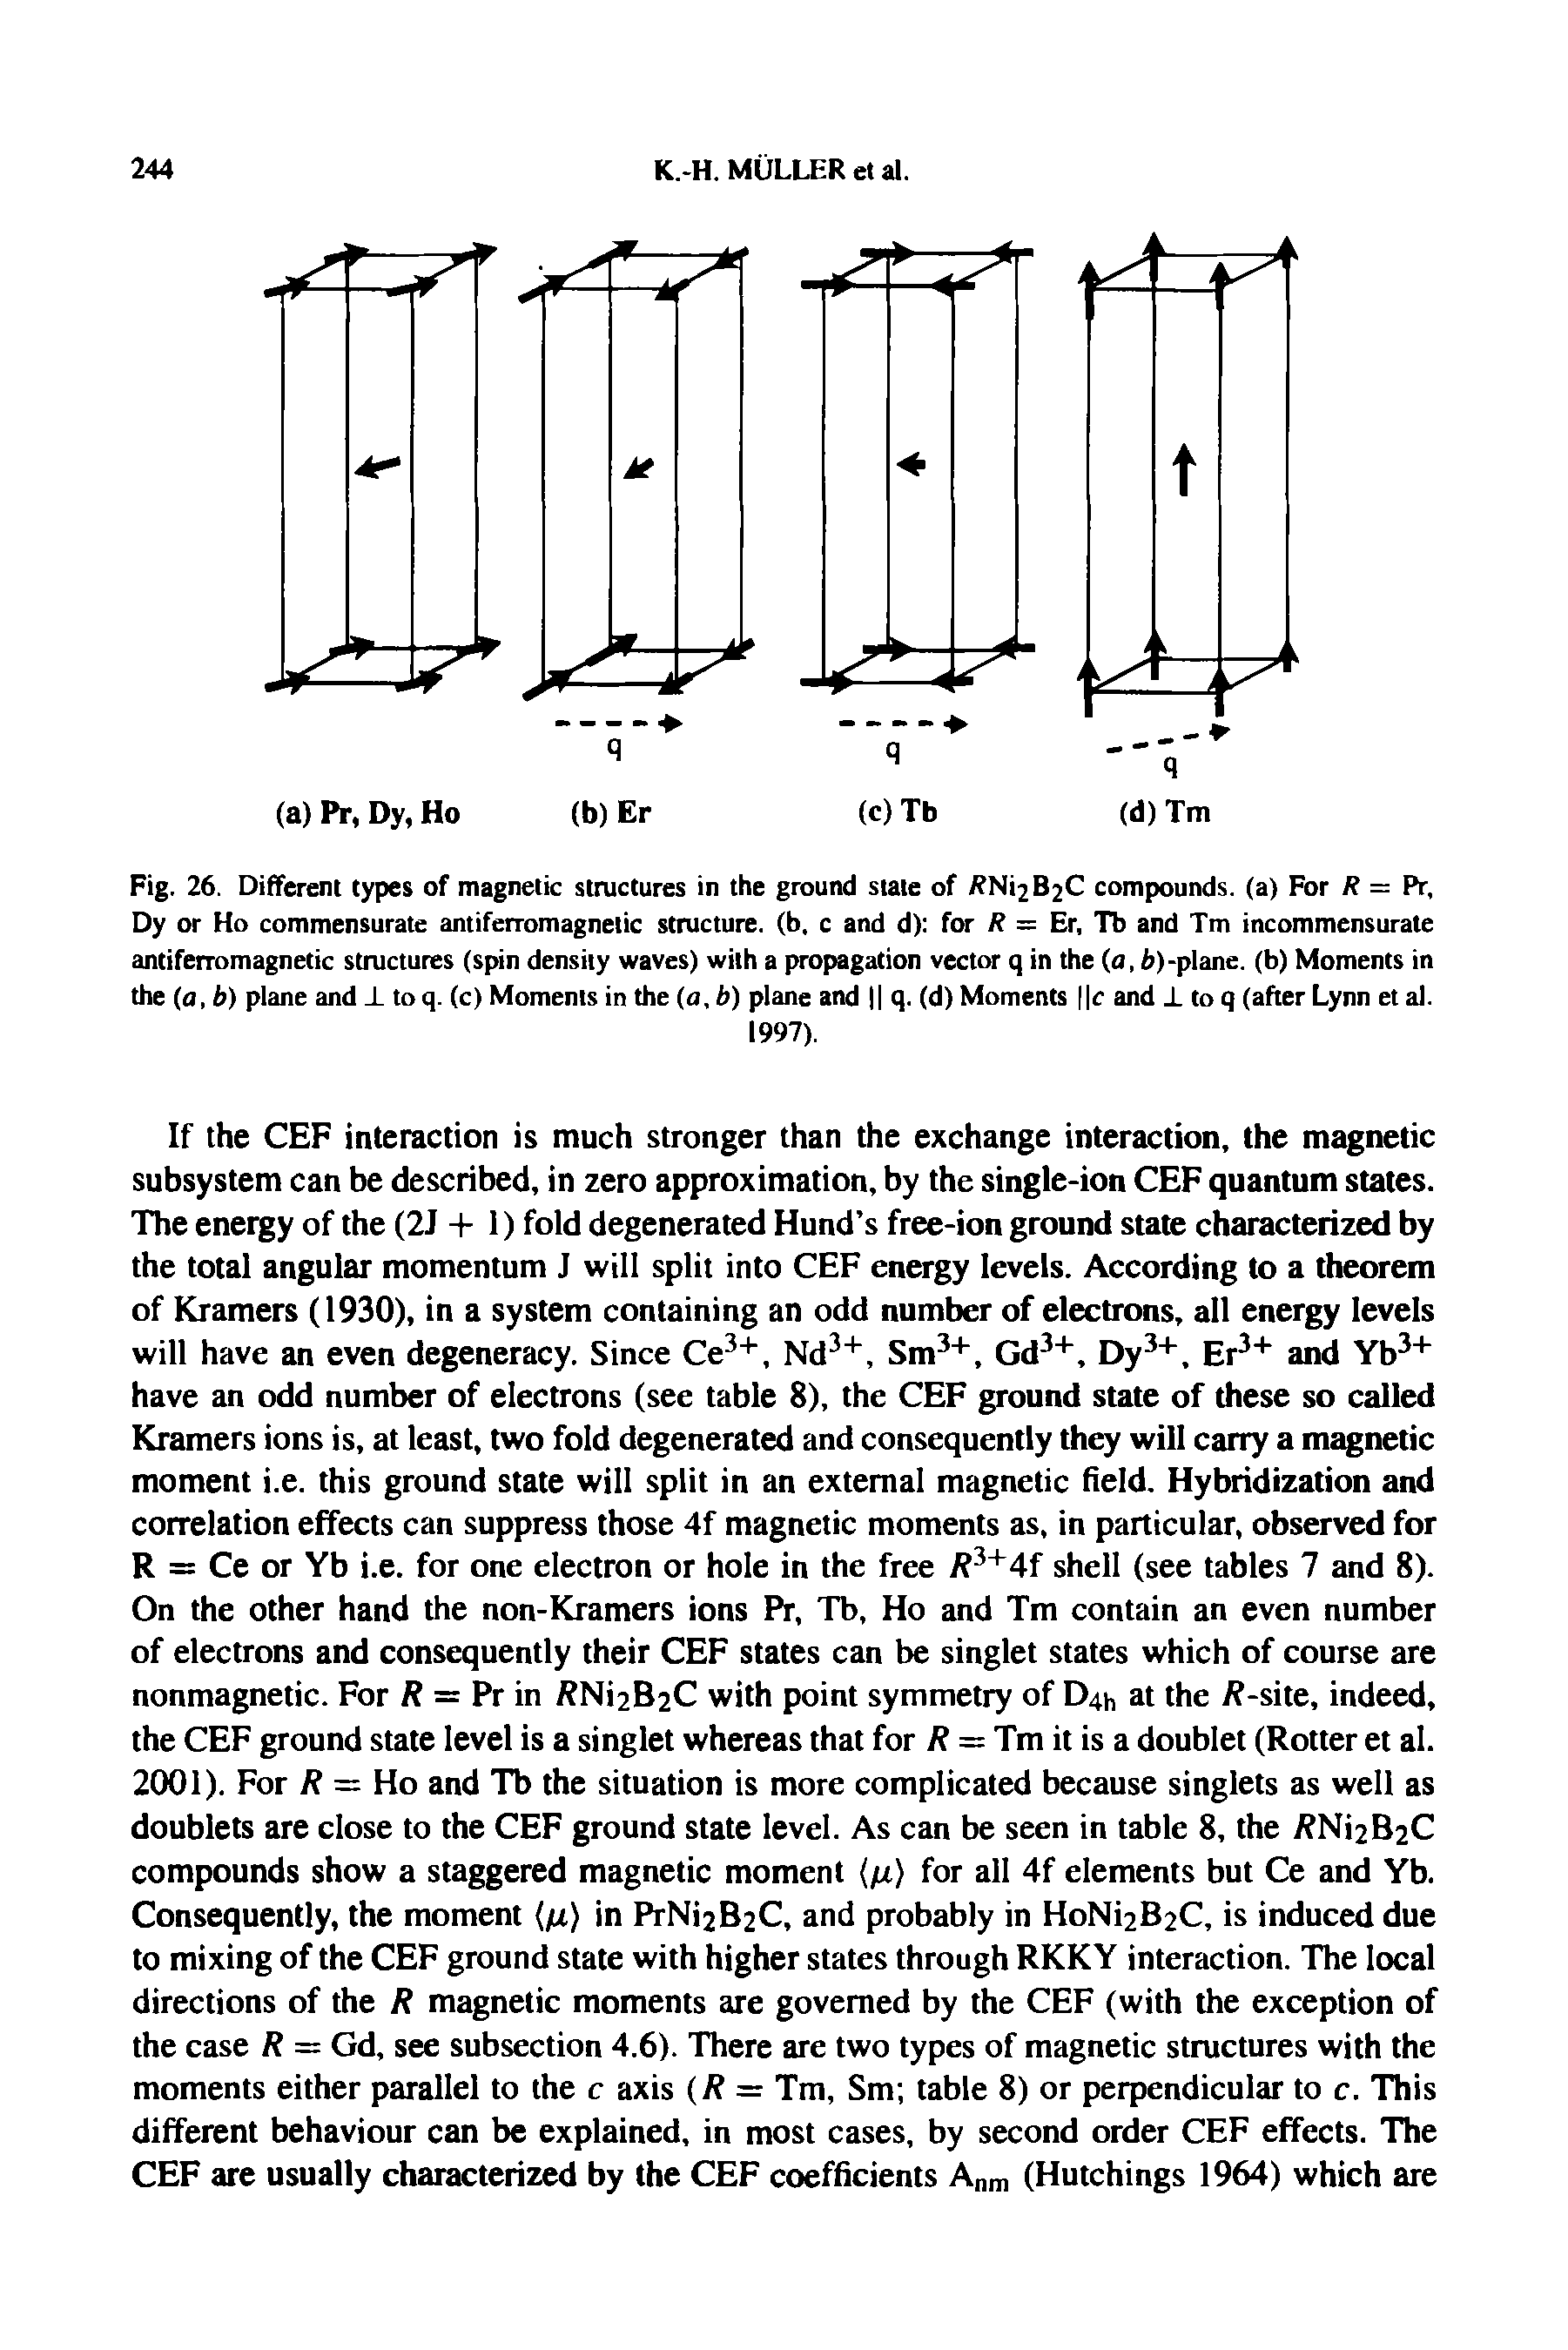 Fig. 26. Different types of magnetic structures in the ground stale of ftNijI C compounds, (a) For R = Pr, Dy or Ho commensurate antiferromagnelic structure, (b, c and d) for R = Er, Tb and Tm incommensurate antiferromagnetic structures (spin density waves) with a propagation vector q in the (a, 6)-plane, (b) Moments in the (a, b) plane and X to q. (c) Moments in the (a, b) plane and q. (d) Moments c and X to q (after Lynn et al.